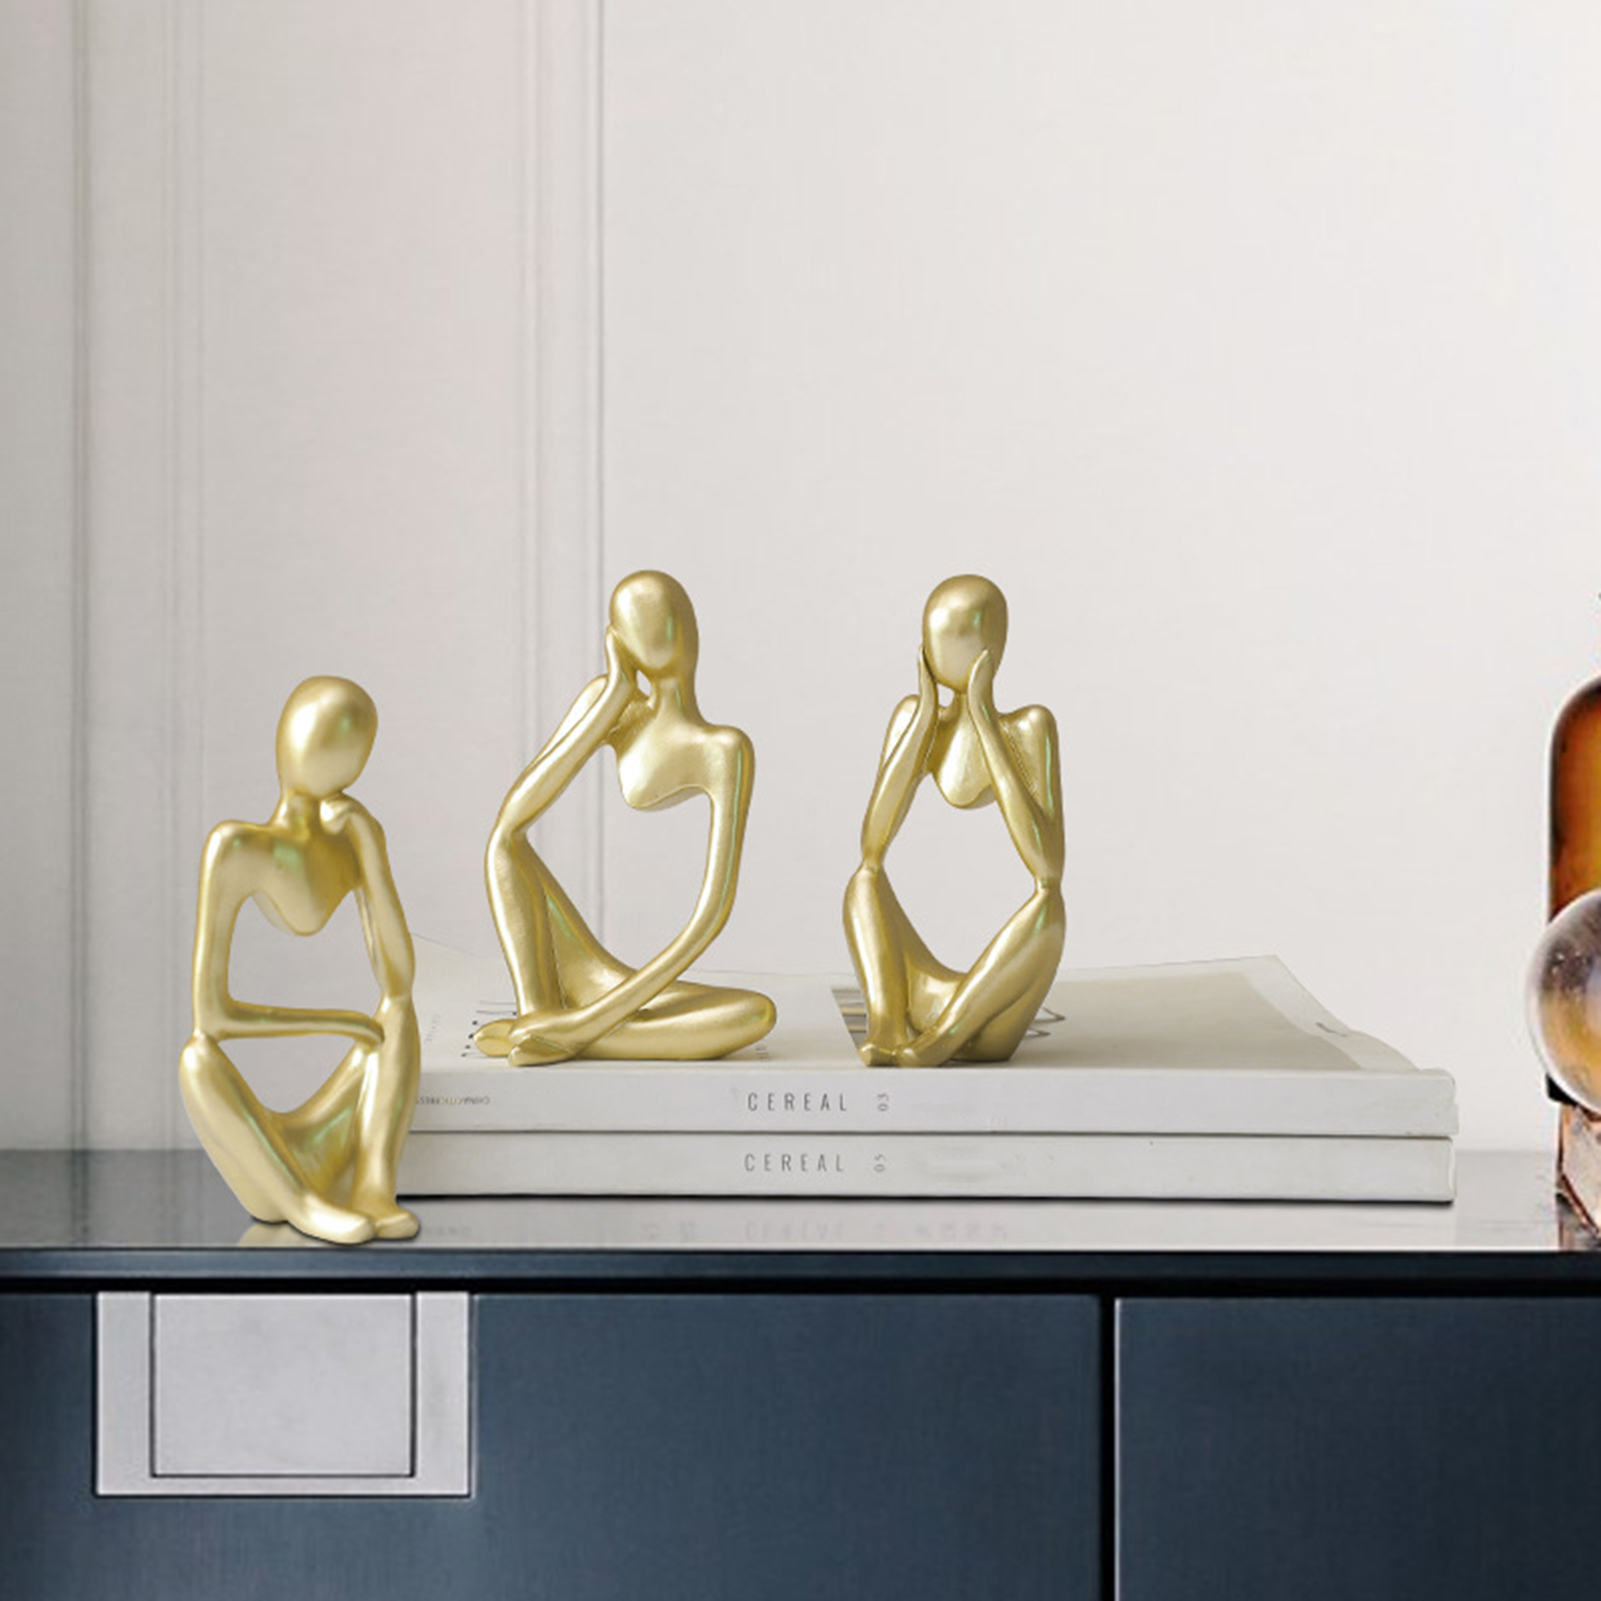 Cheers.US Resin Statue Thinker Style Decoration Abstract Sculptures Thinker Man Statue Collectible Figurines for Home Decor Modern Office Bookshelf Shelf Desktop - image 4 of 7